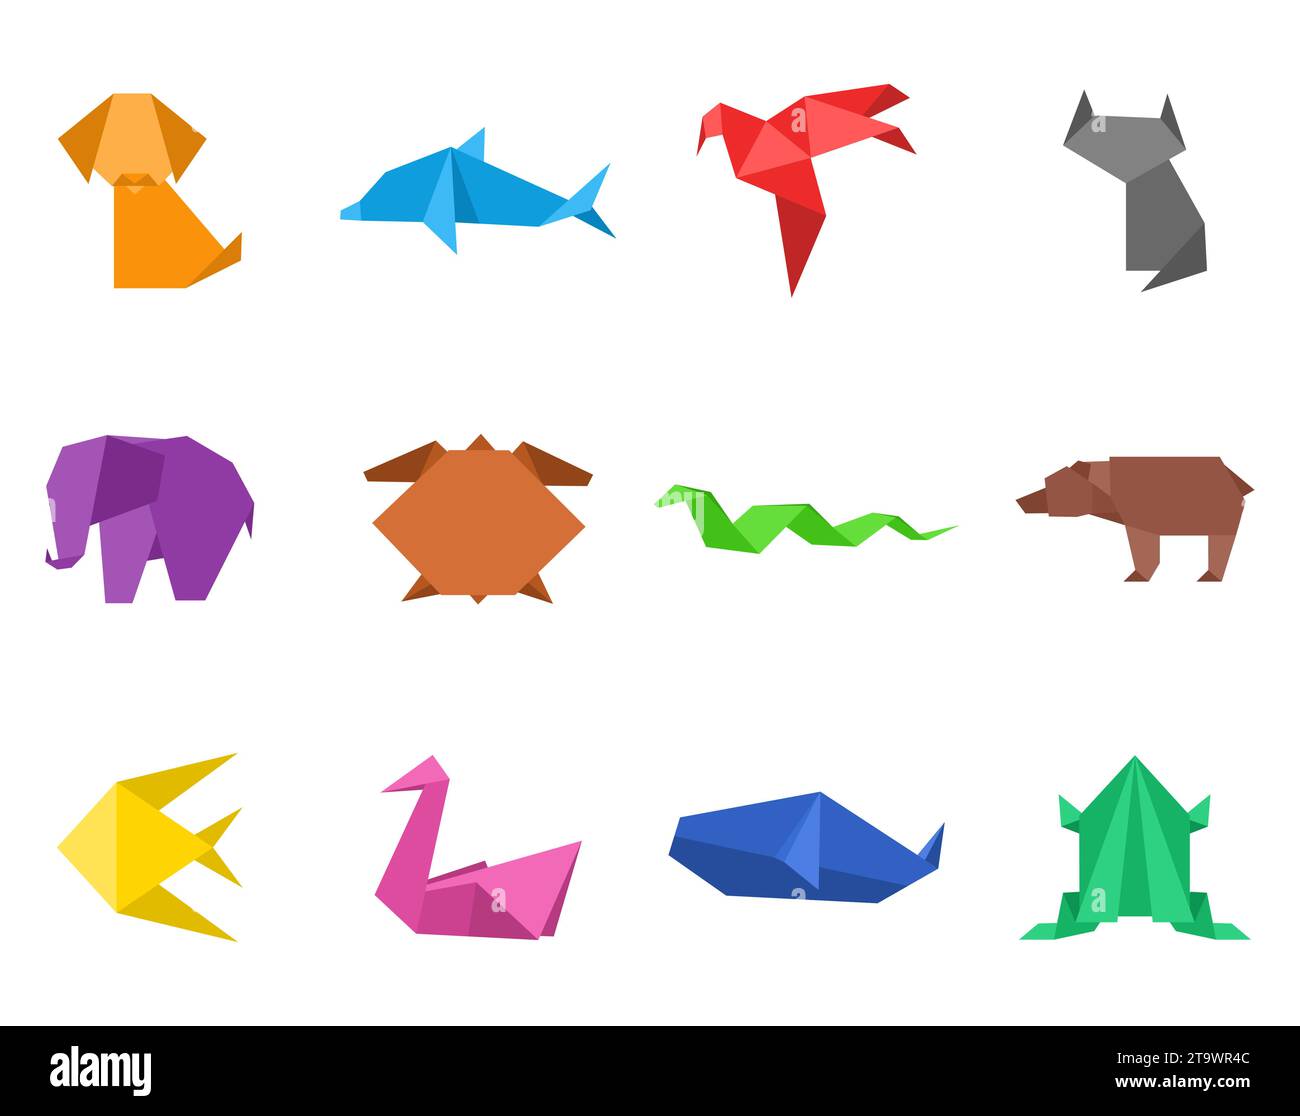 Origami japanese animals set. Modern hobby. Polygon folded paper color figure toy. Art of paper folding. Cartoon geometric wild animal shaped figures. Stock Vector